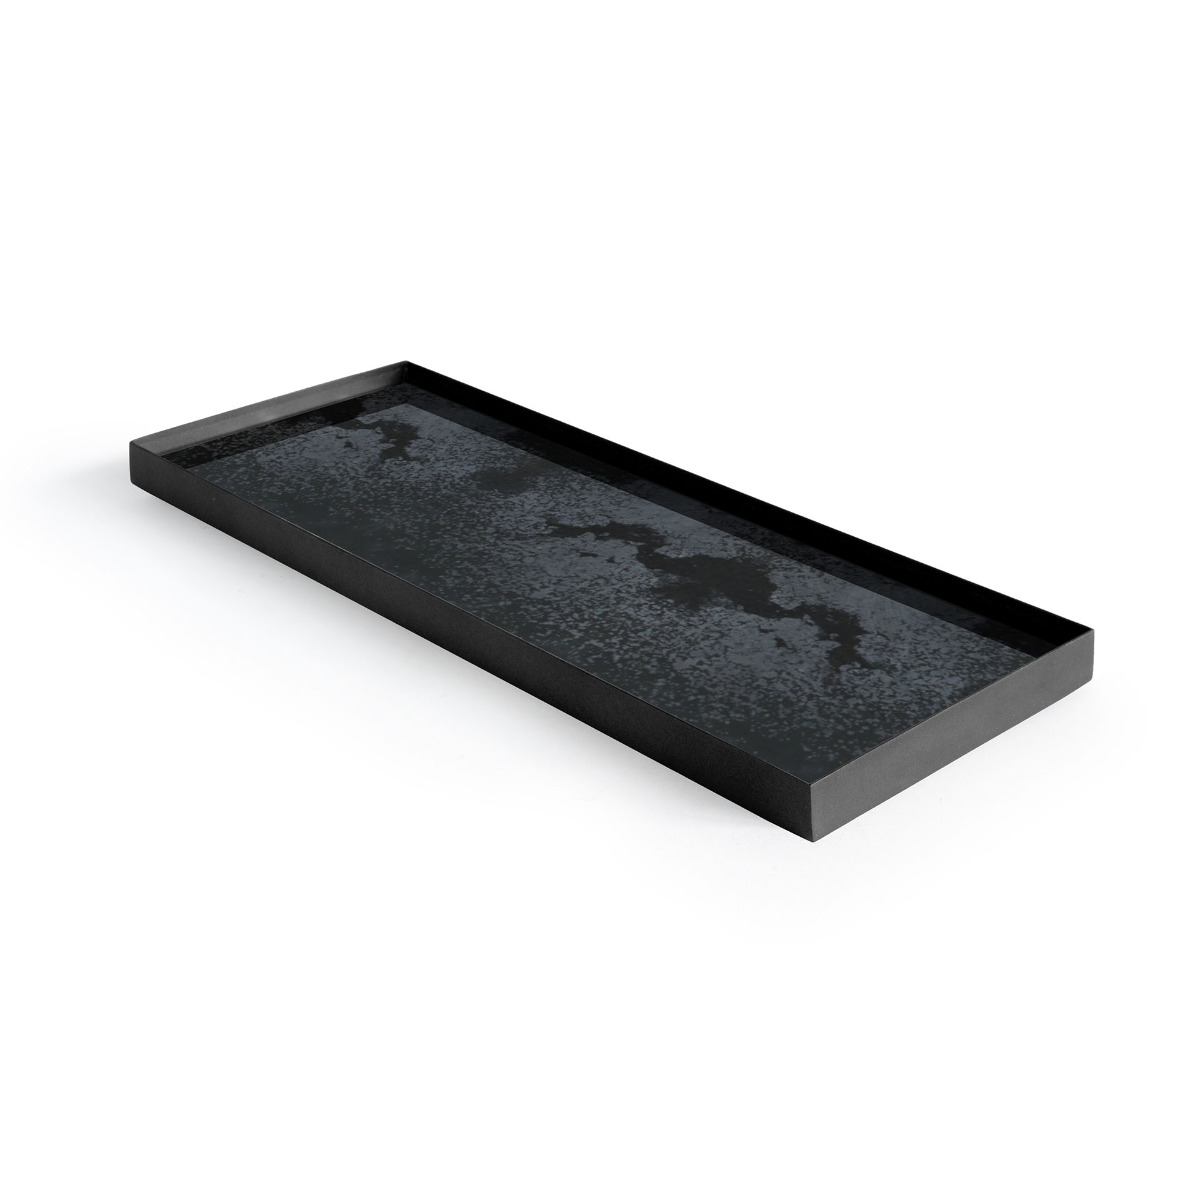 Charcoal mirror valet tray Large